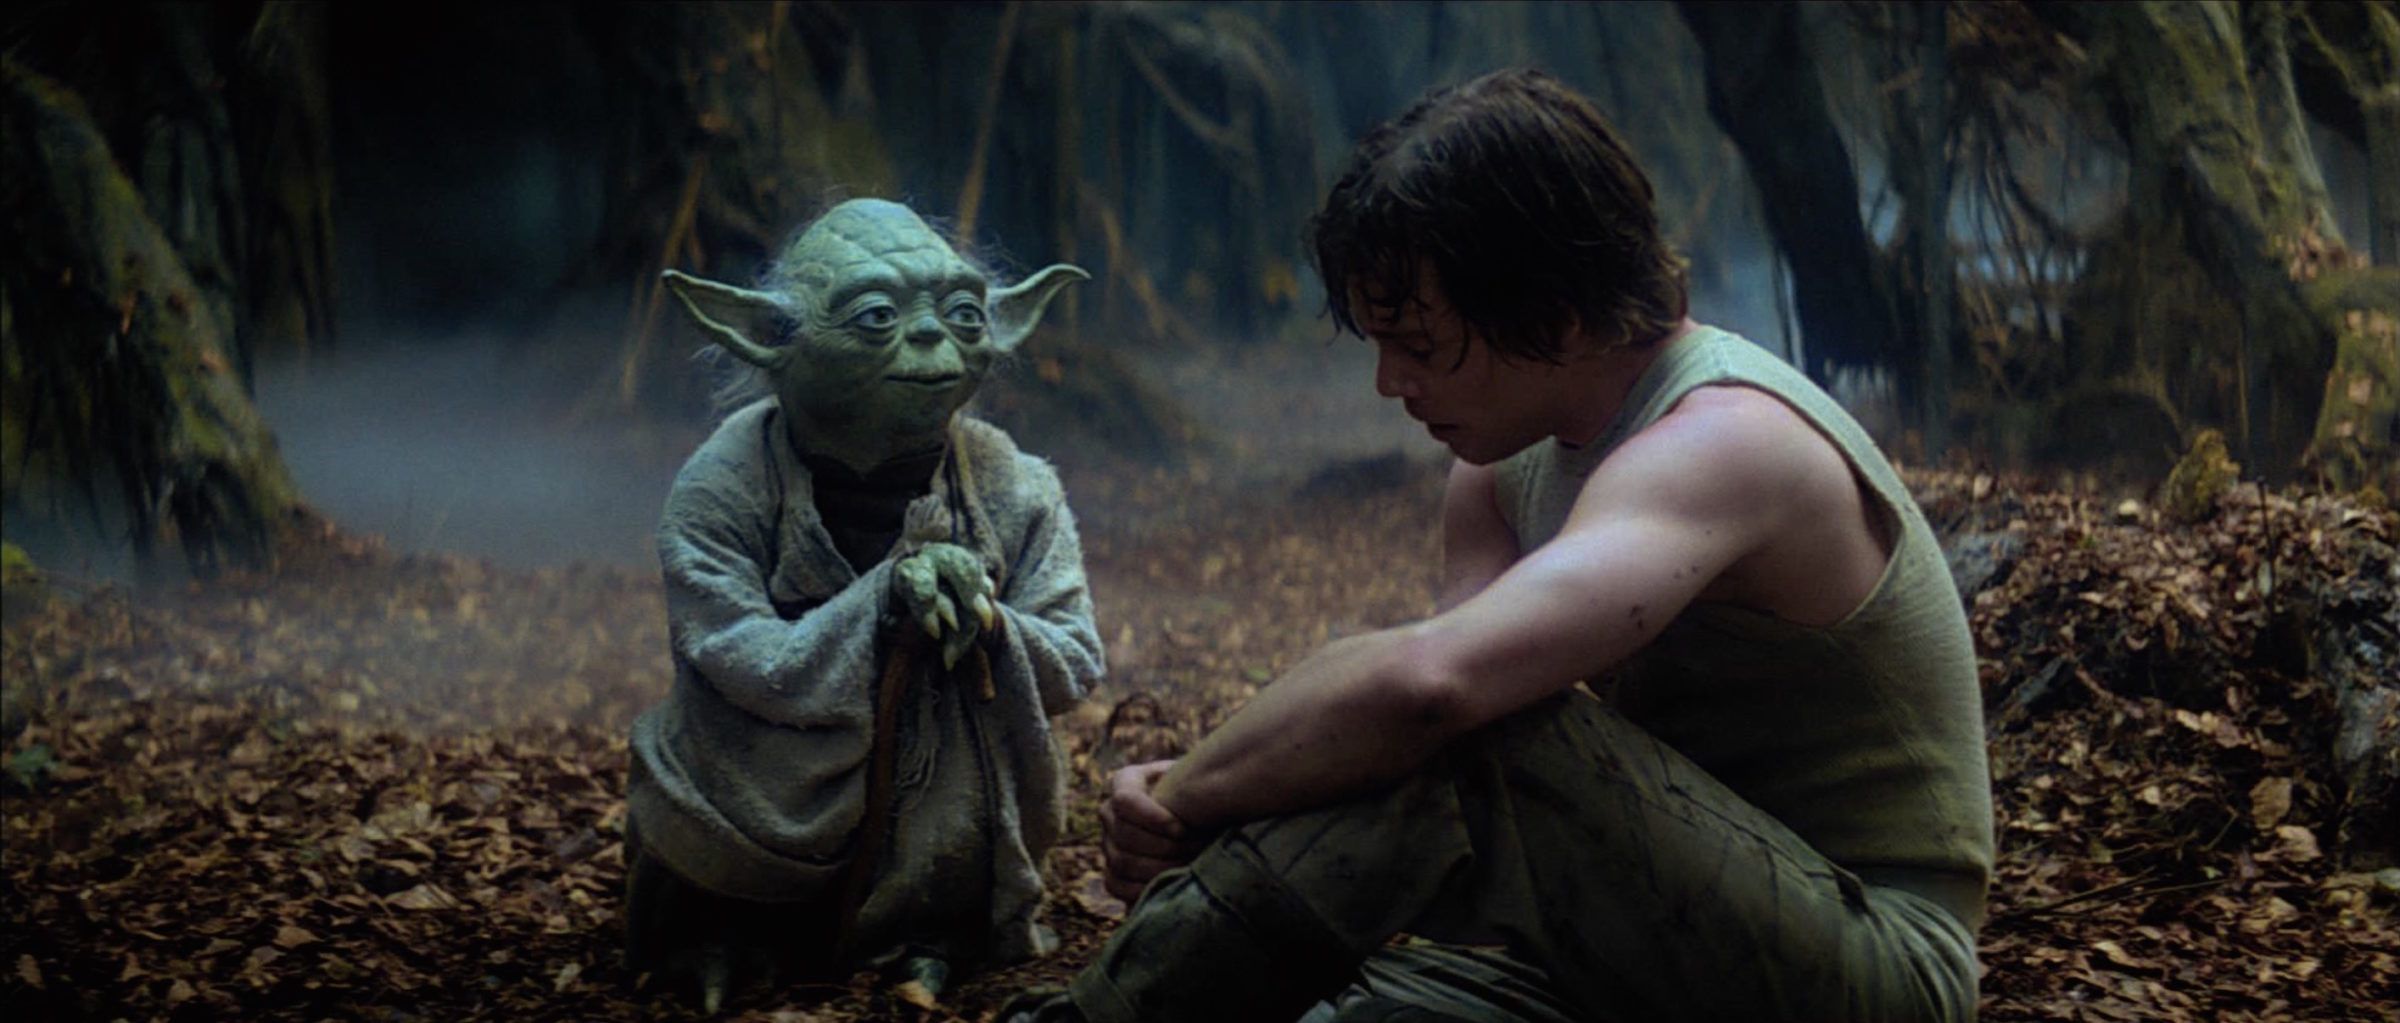 Star Wars Quotes to Help You Through a Bad Day